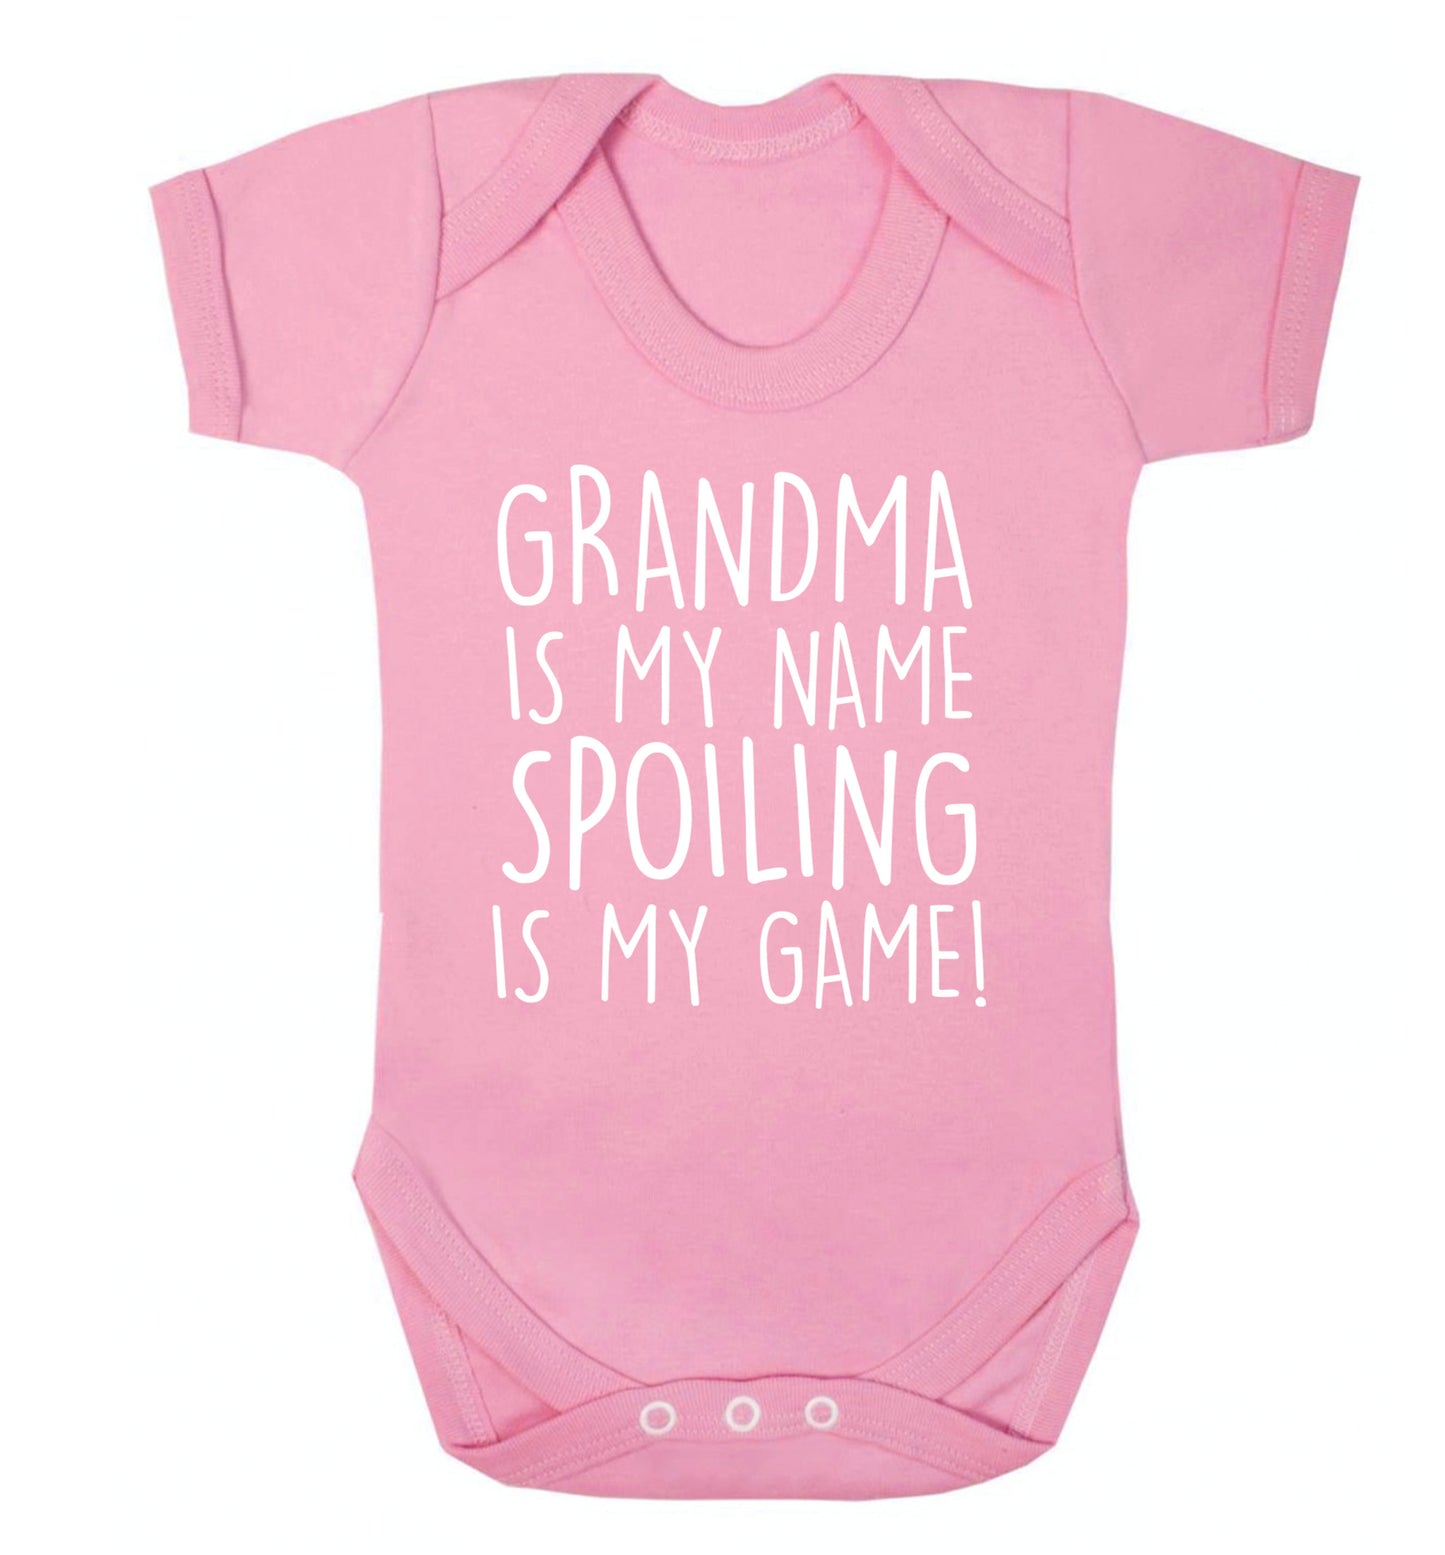 Grandma is my name, spoiling is my game Baby Vest pale pink 18-24 months